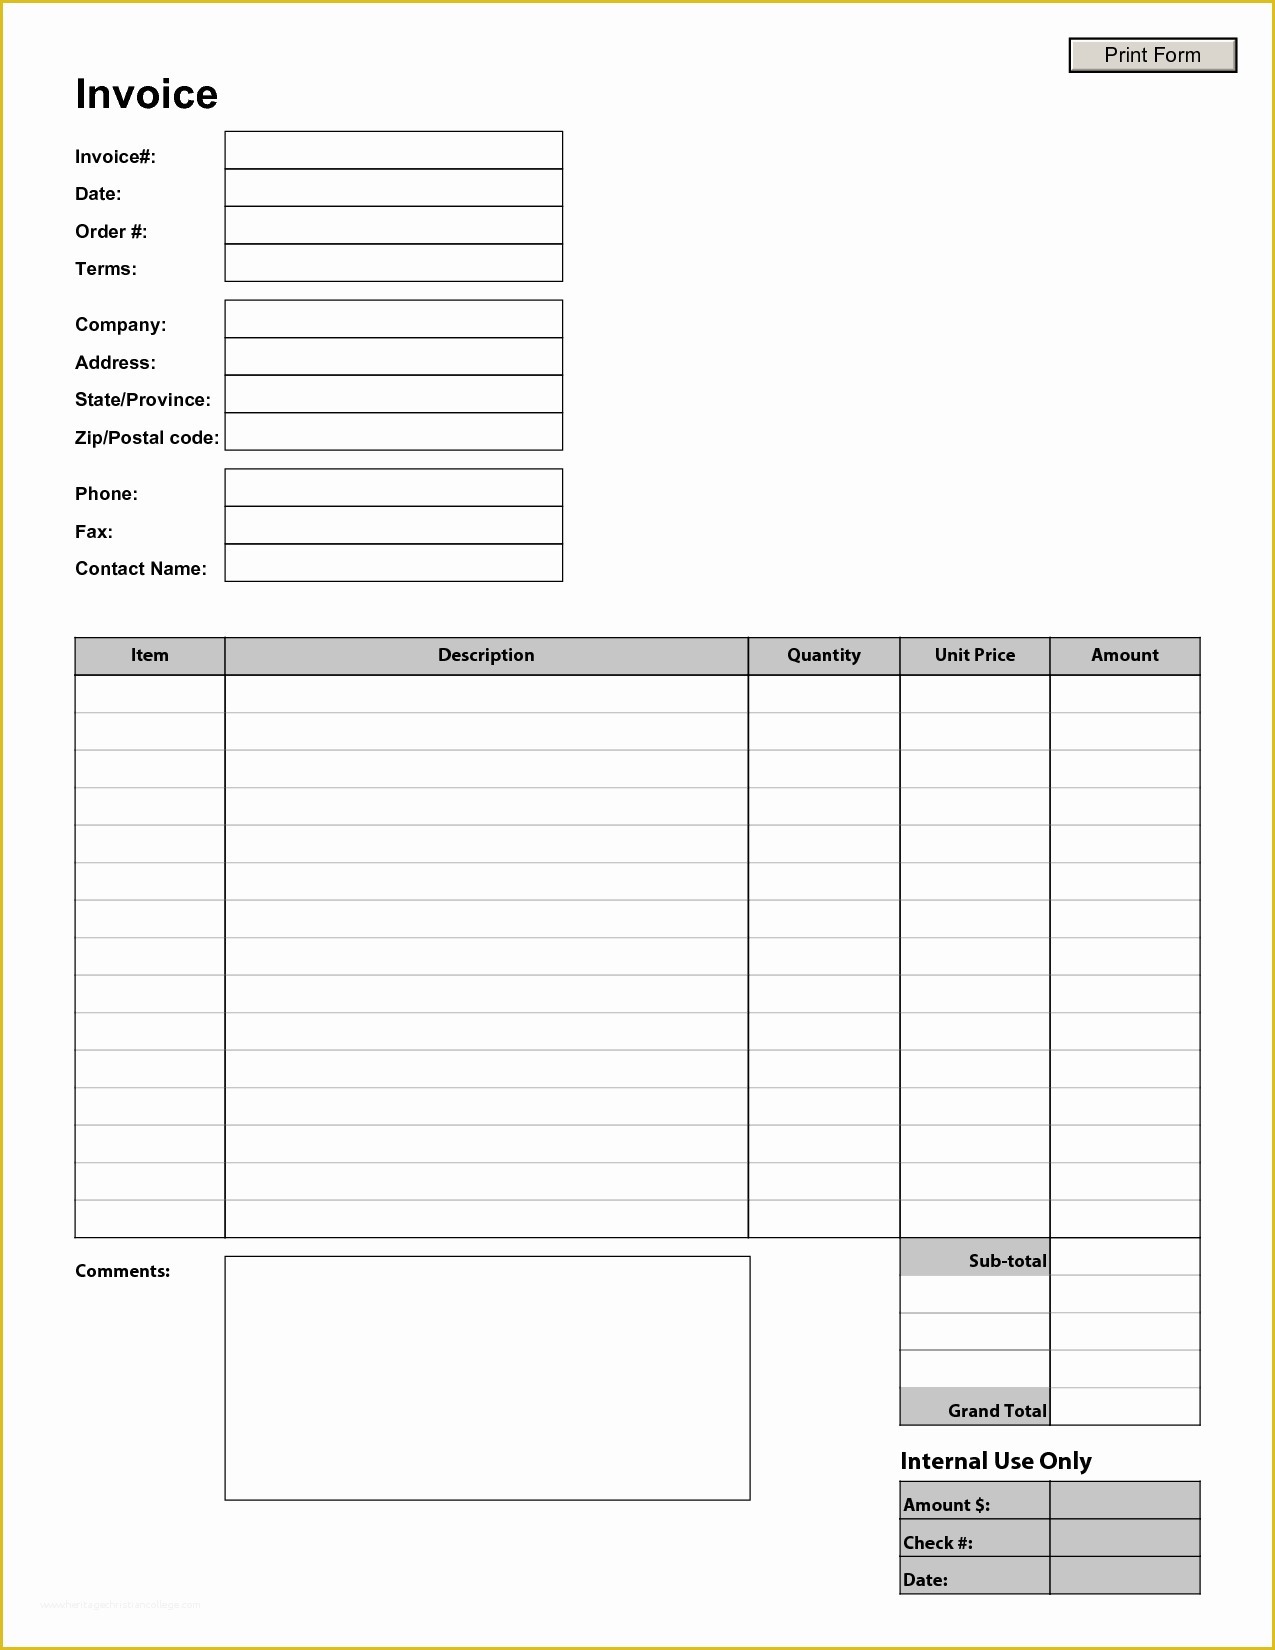 Fill In the Blank Invoice Template Free Of Printable Invoice Template